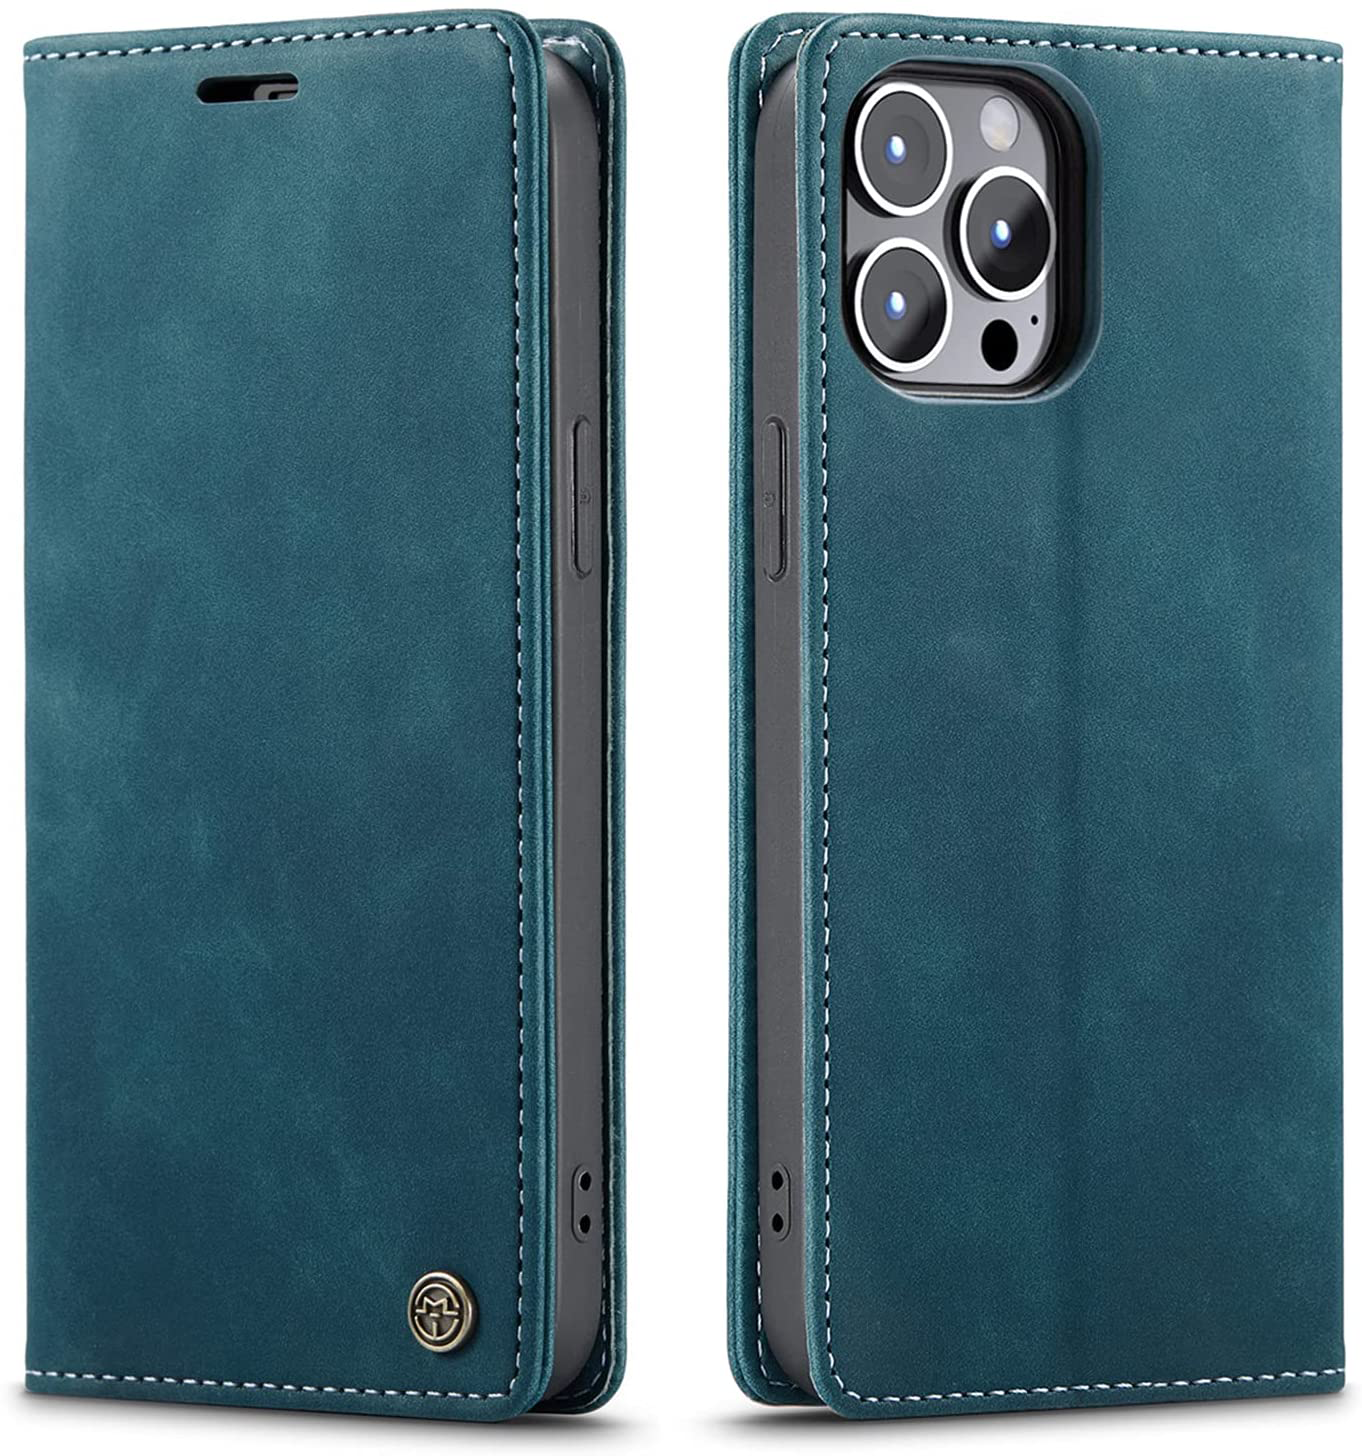 iPhone 13 Pro blue color leather wallet flip cover case By excelsior